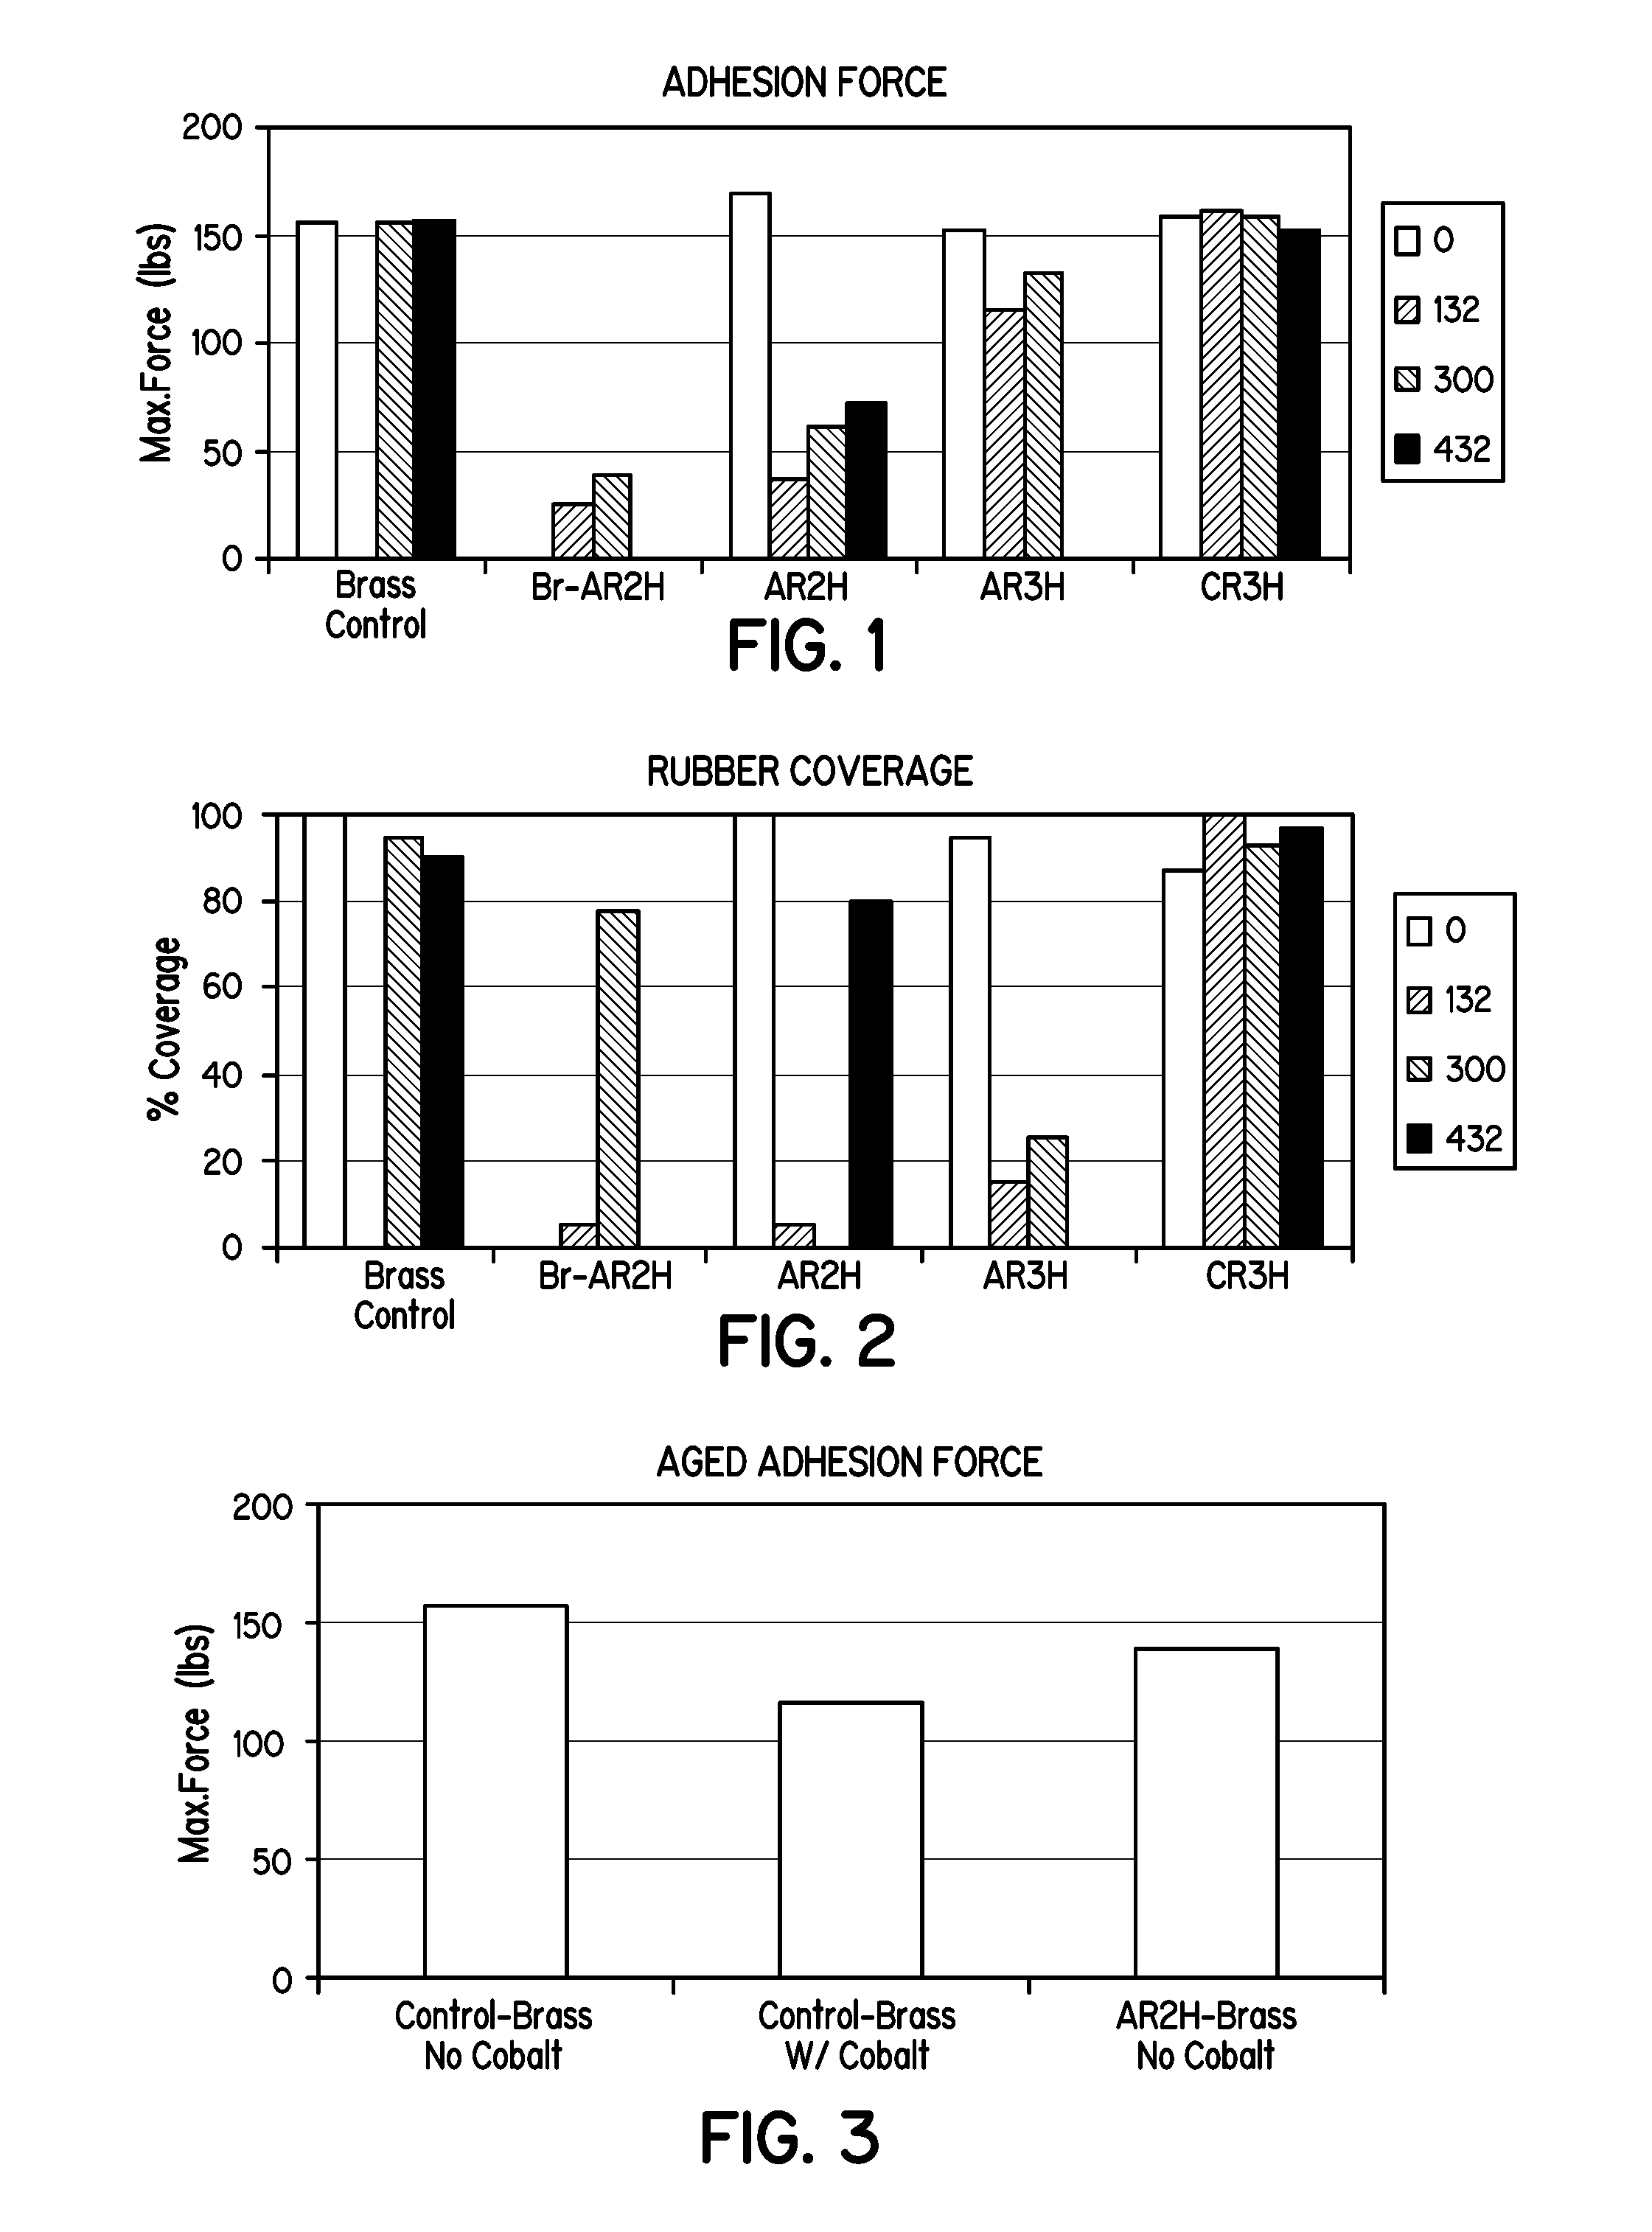 Silane Compositions and Methods for Bonding Rubber to Metals